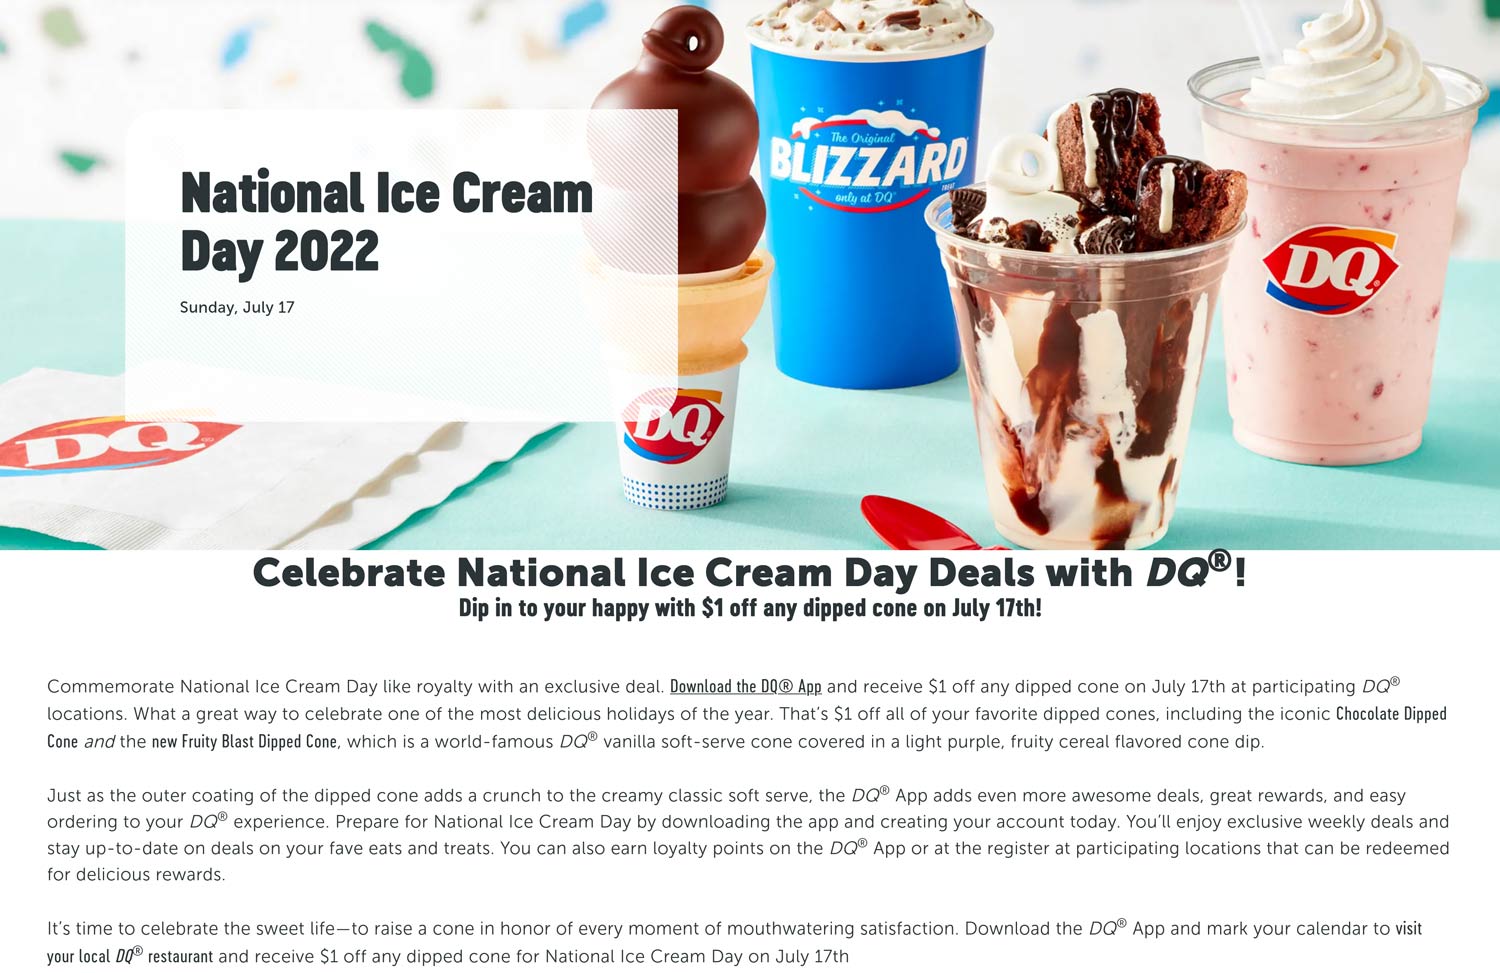 Dairy Queen restaurants Coupon  $1 off dipped ice cream cone Sunday via mobile at Dairy Queen #dairyqueen 